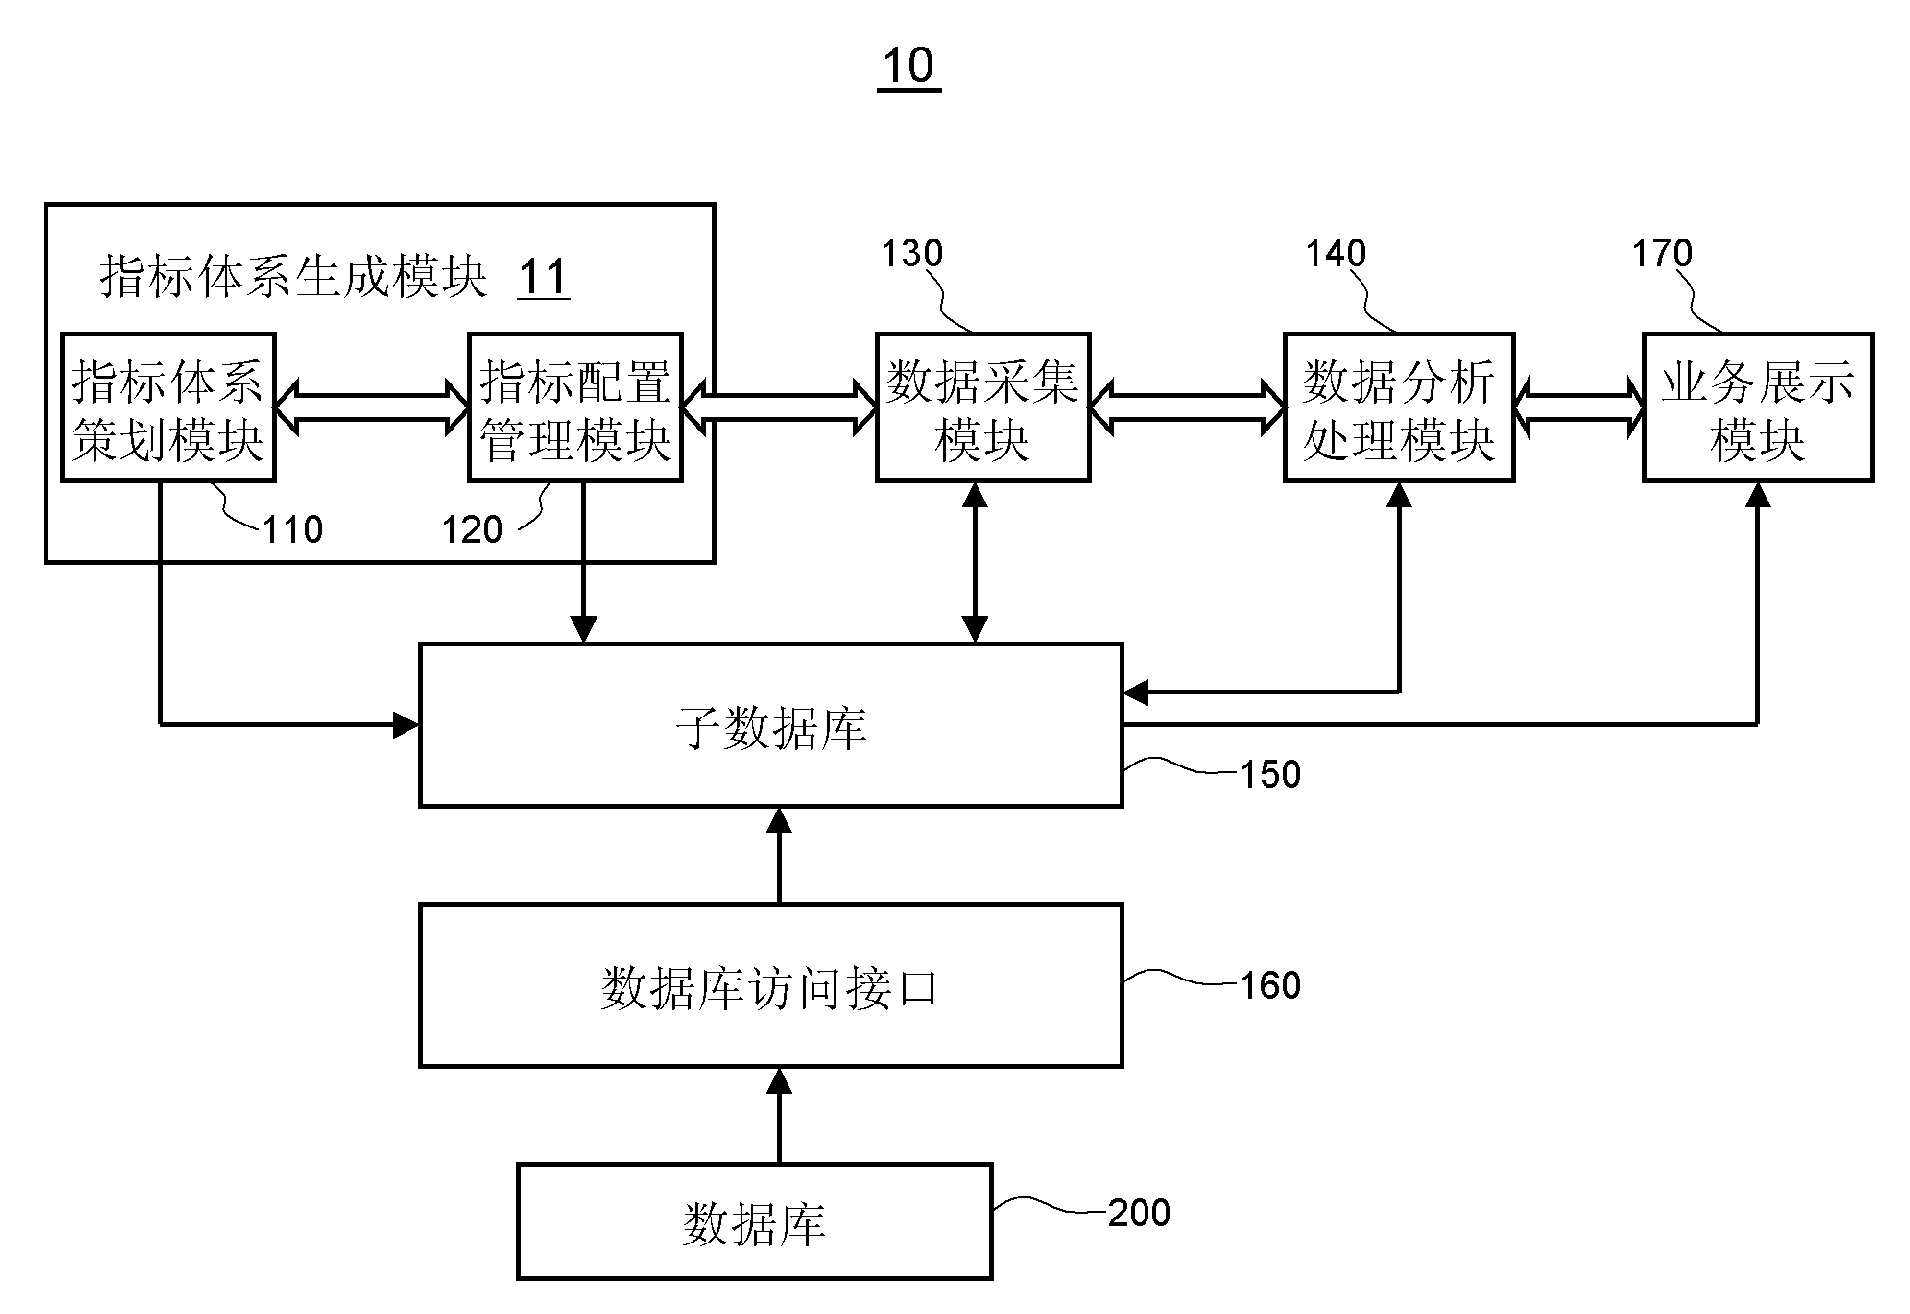 Operation maintenance system of distributed IT system, and operation maintenance management method thereof